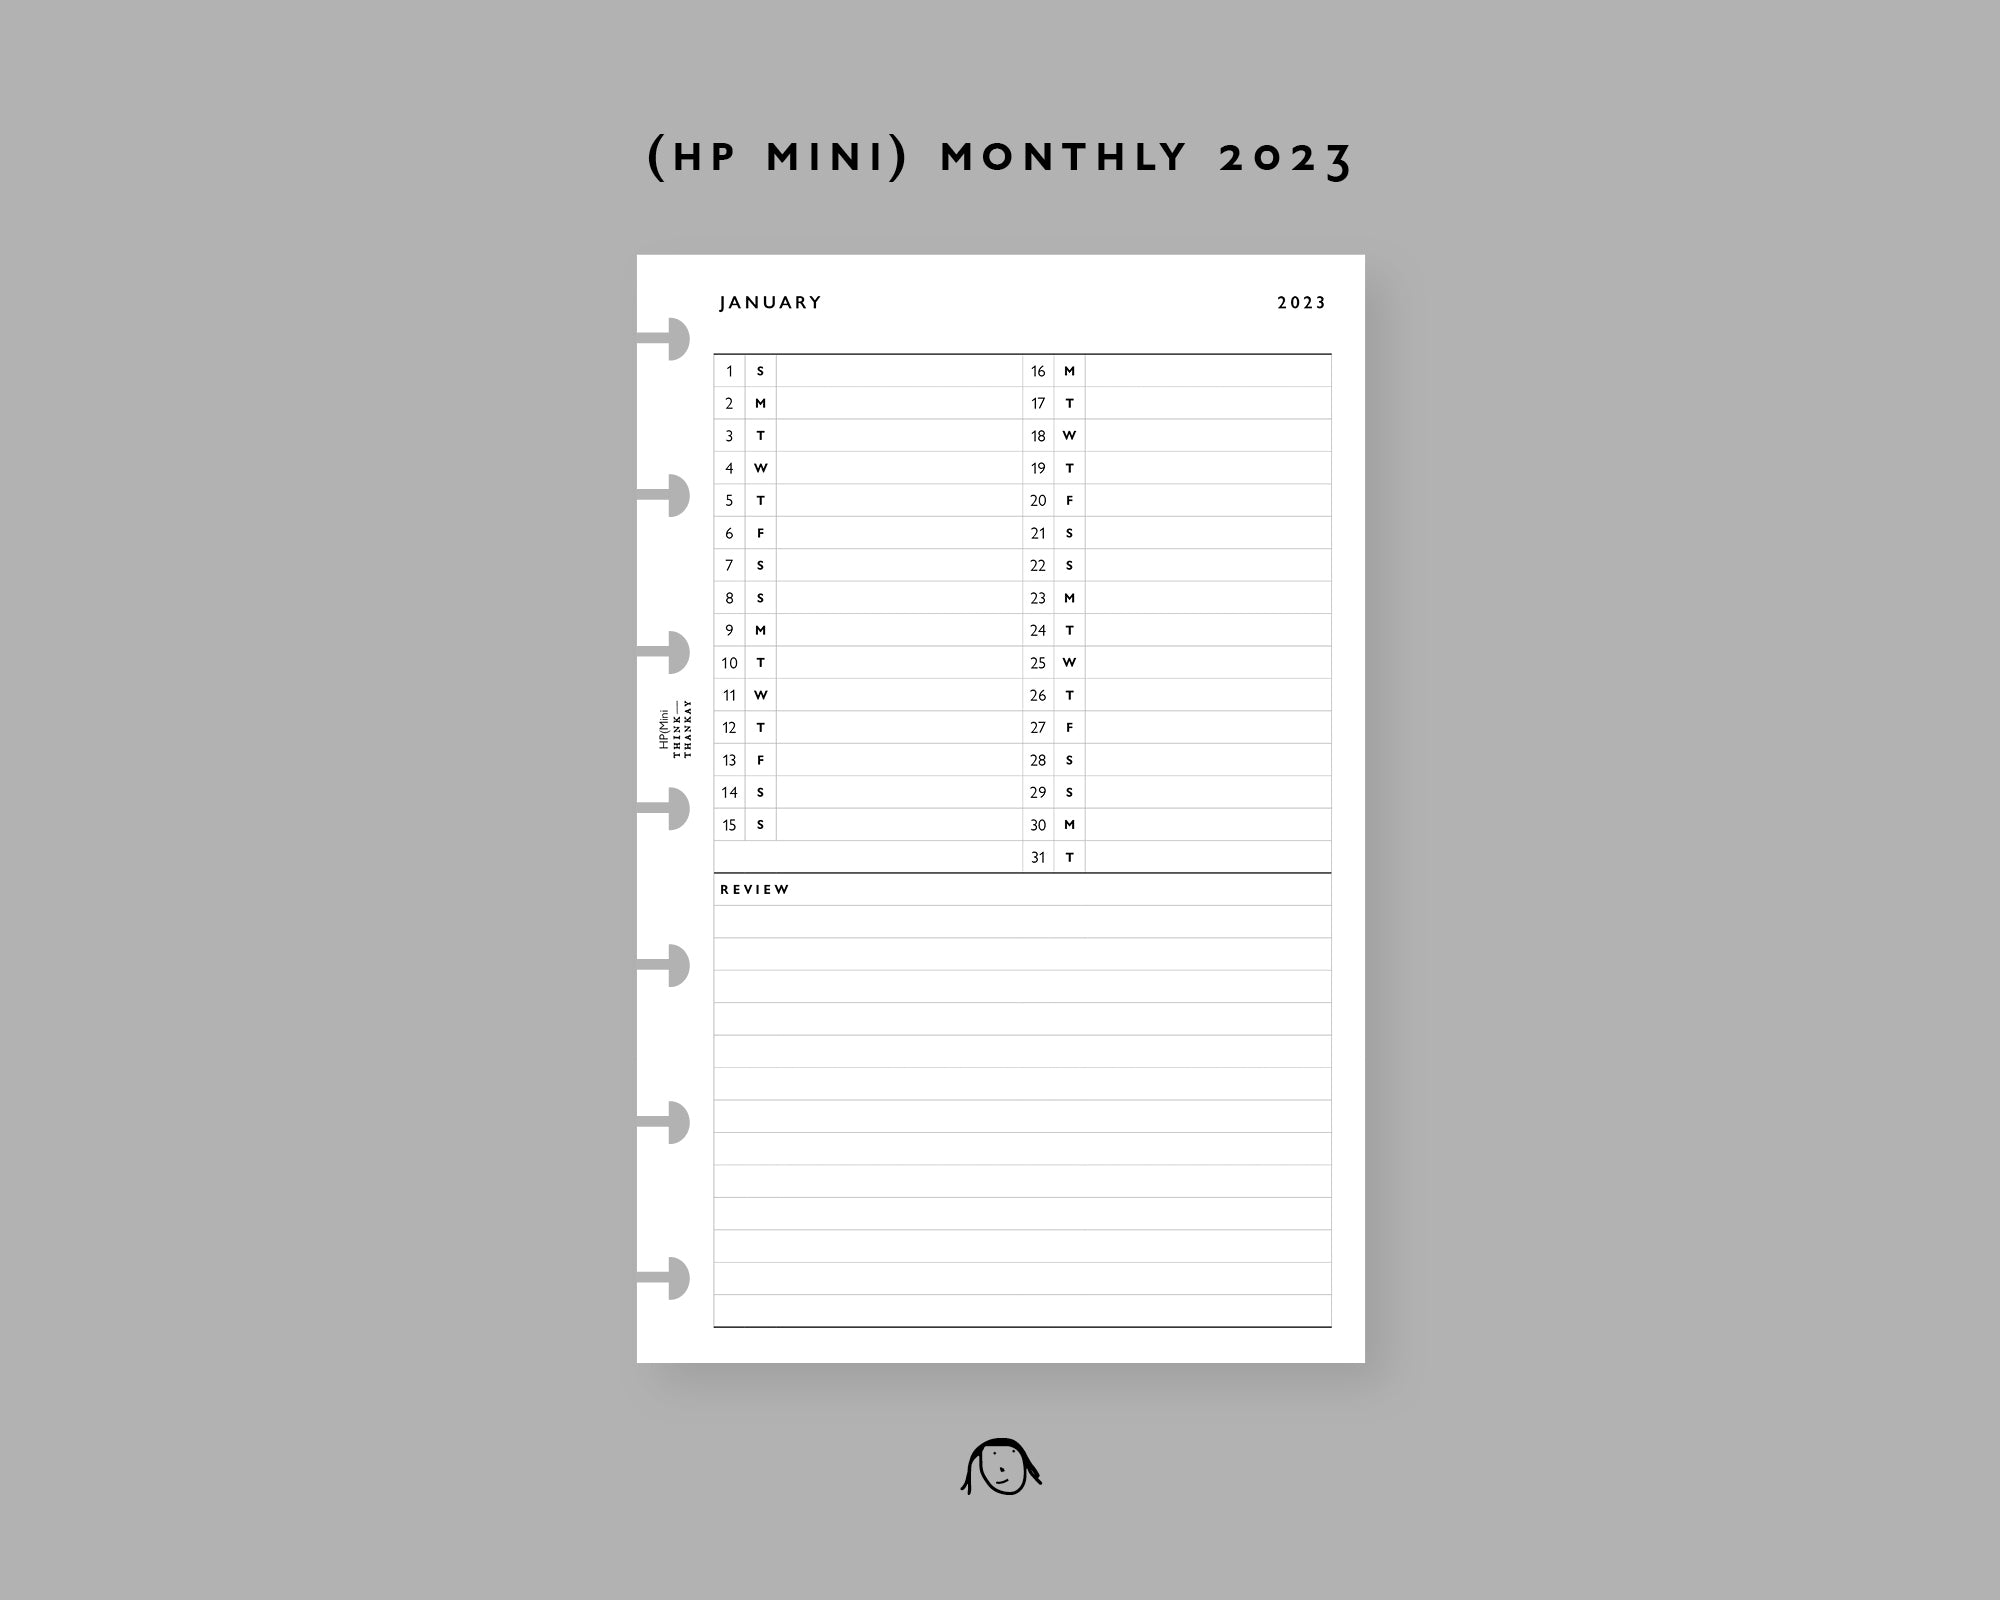 M8D23: Monthly 2023